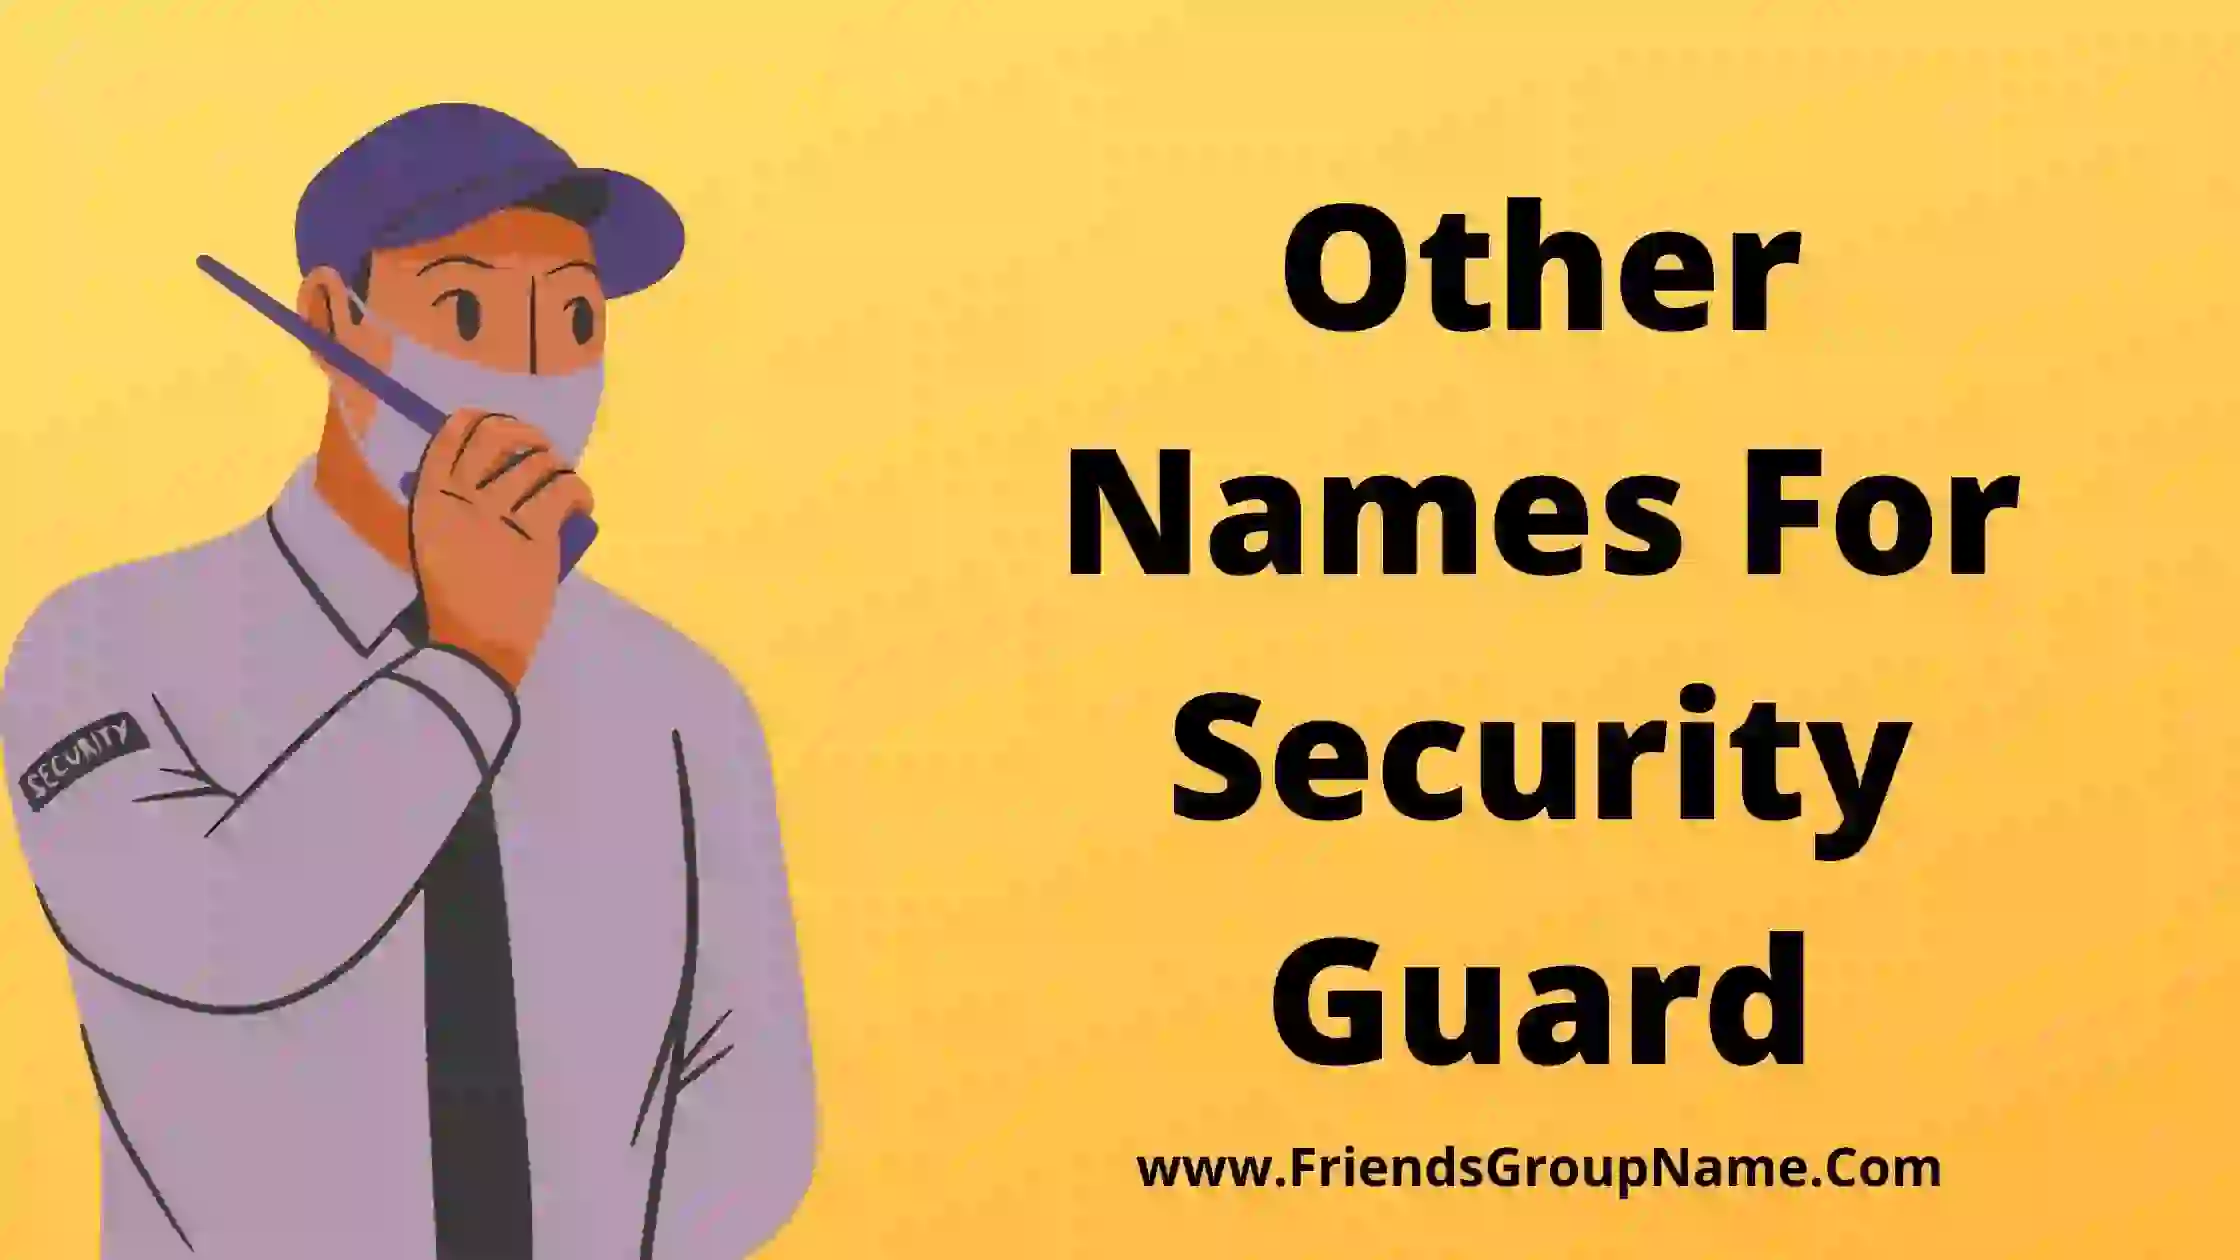 Other Names For Security Guard